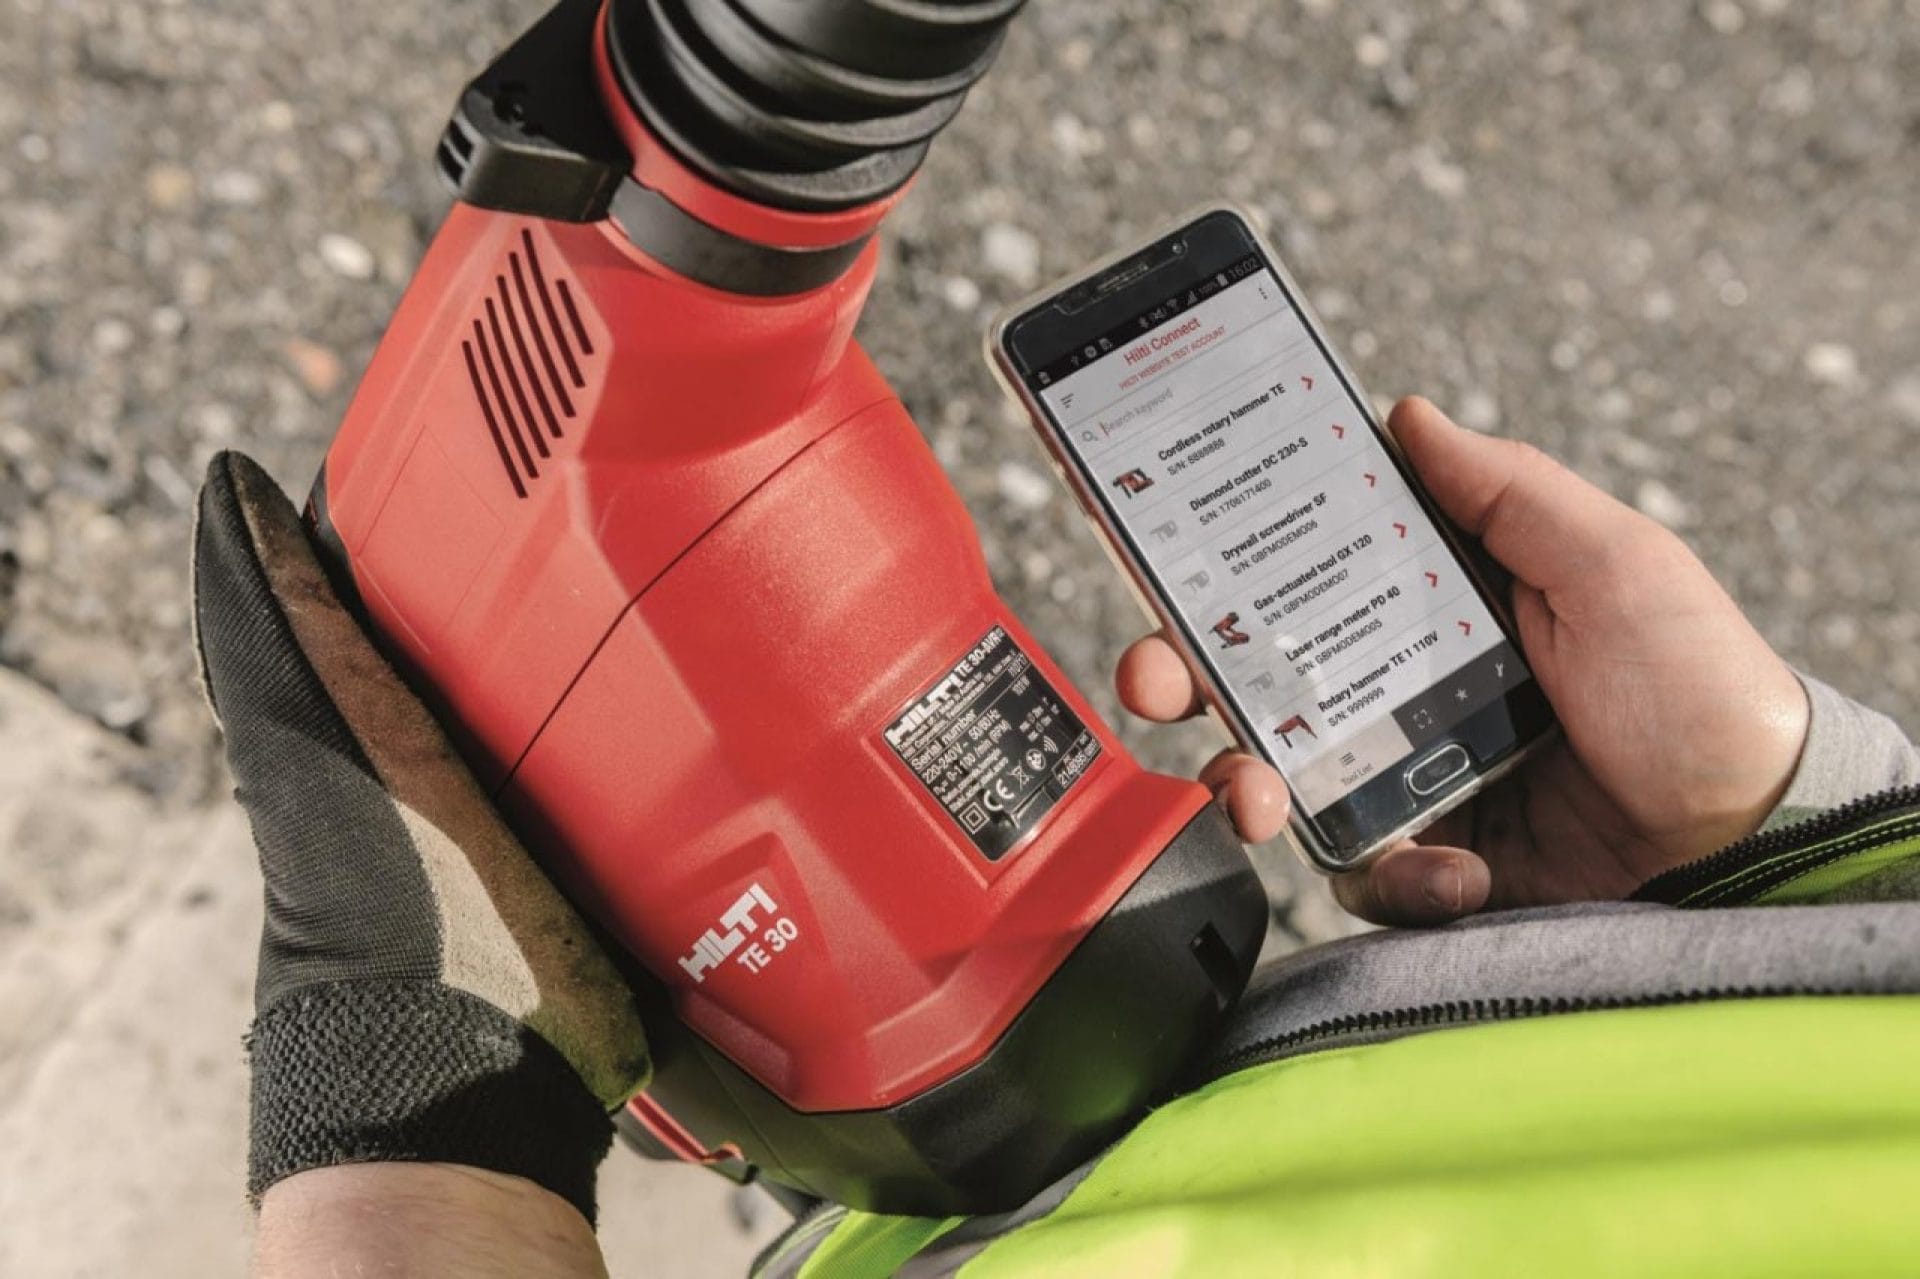 Indentifying tools with Hilti Connect app